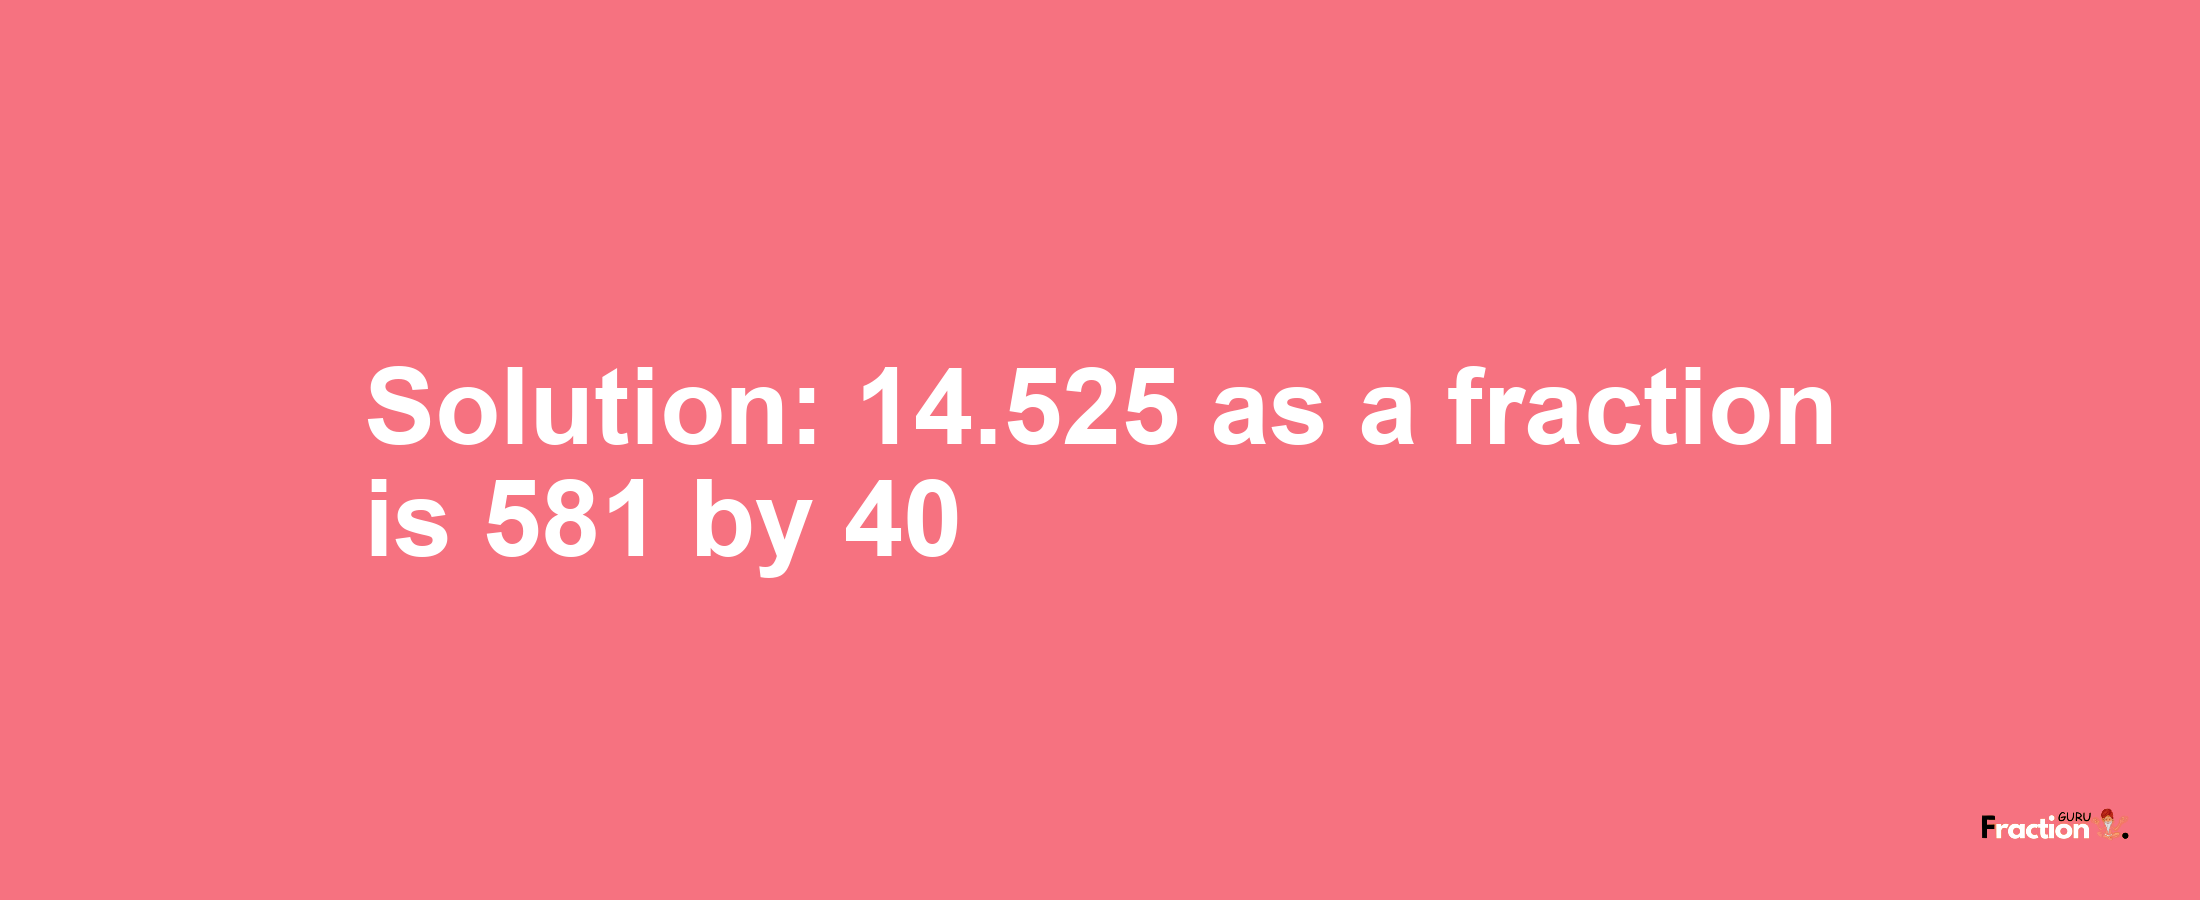 Solution:14.525 as a fraction is 581/40